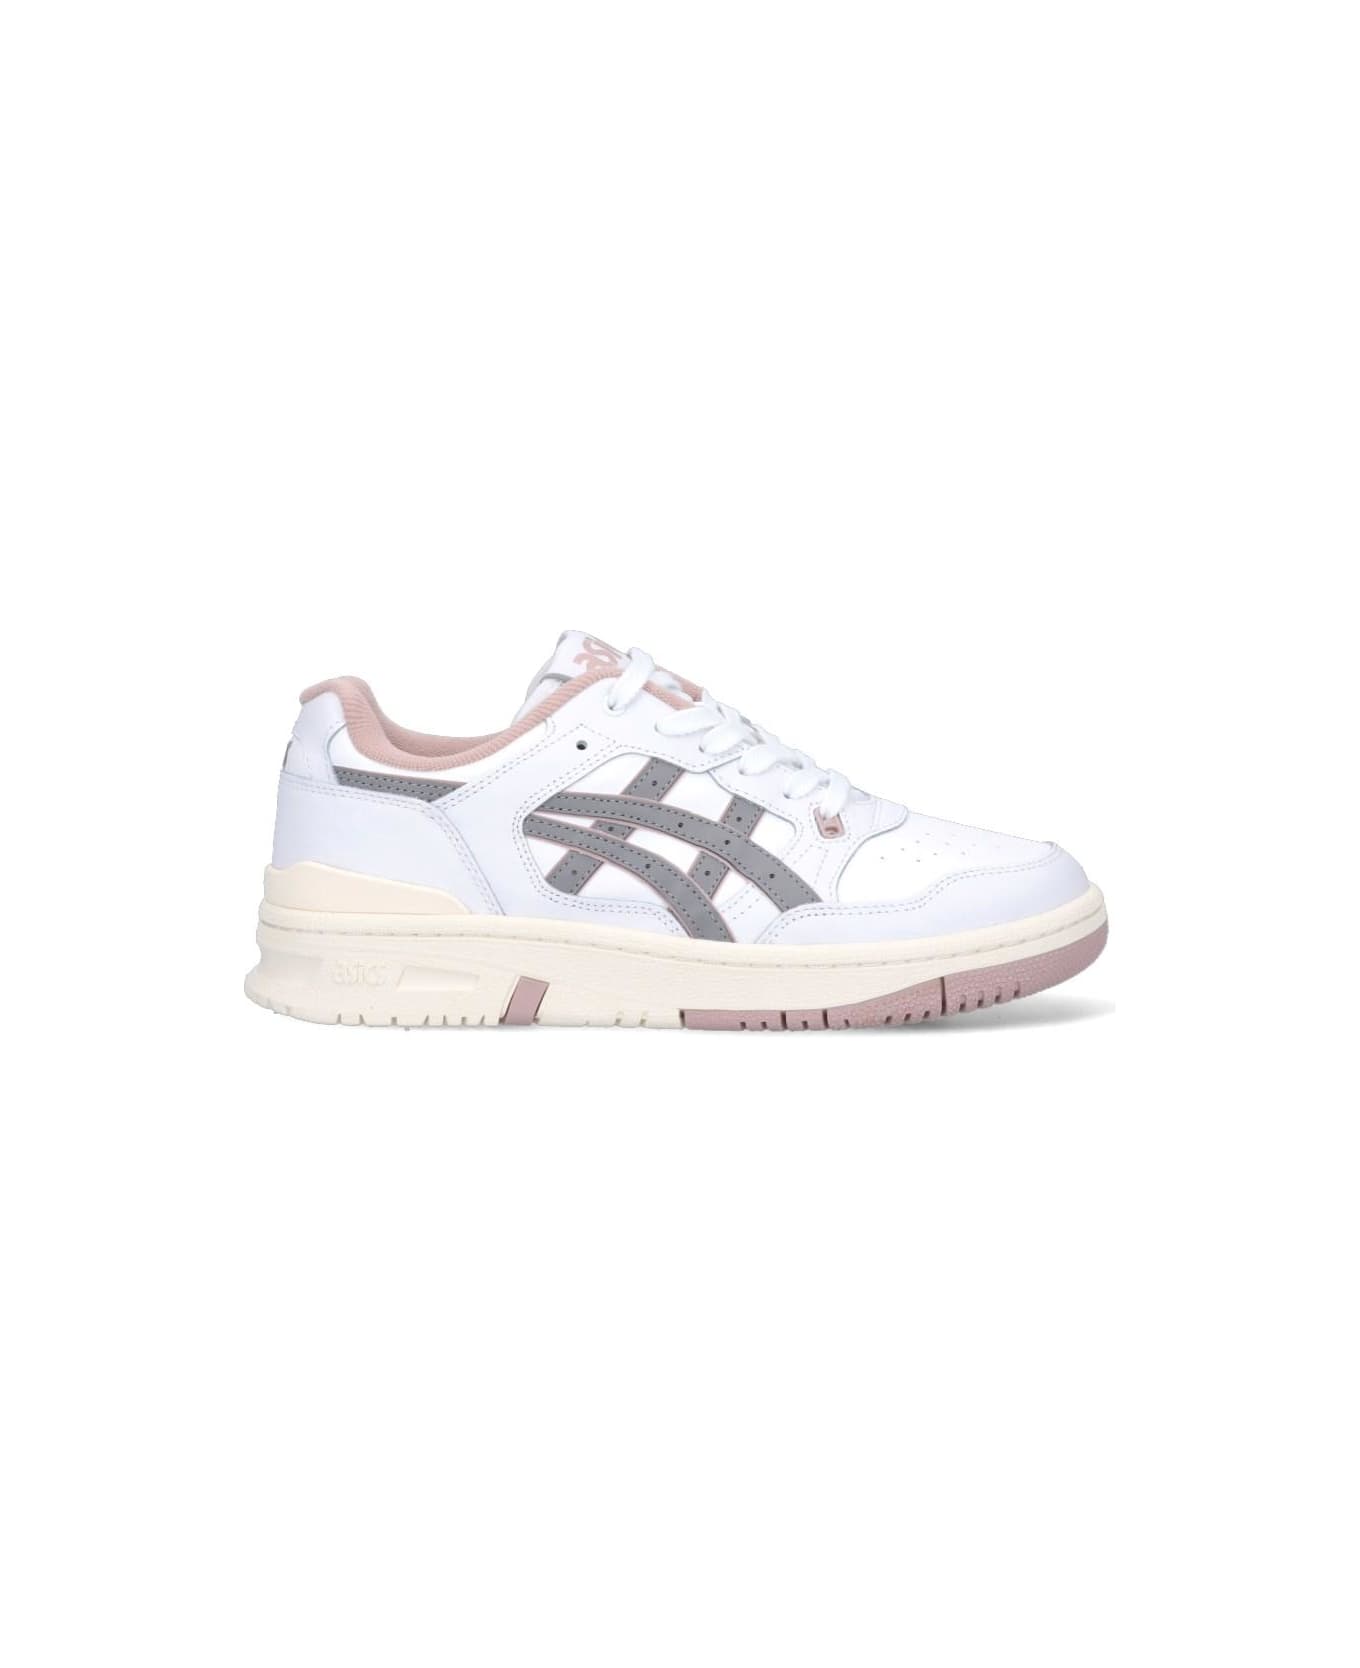 Asics Ex89 Sneakers - White Clay Grey